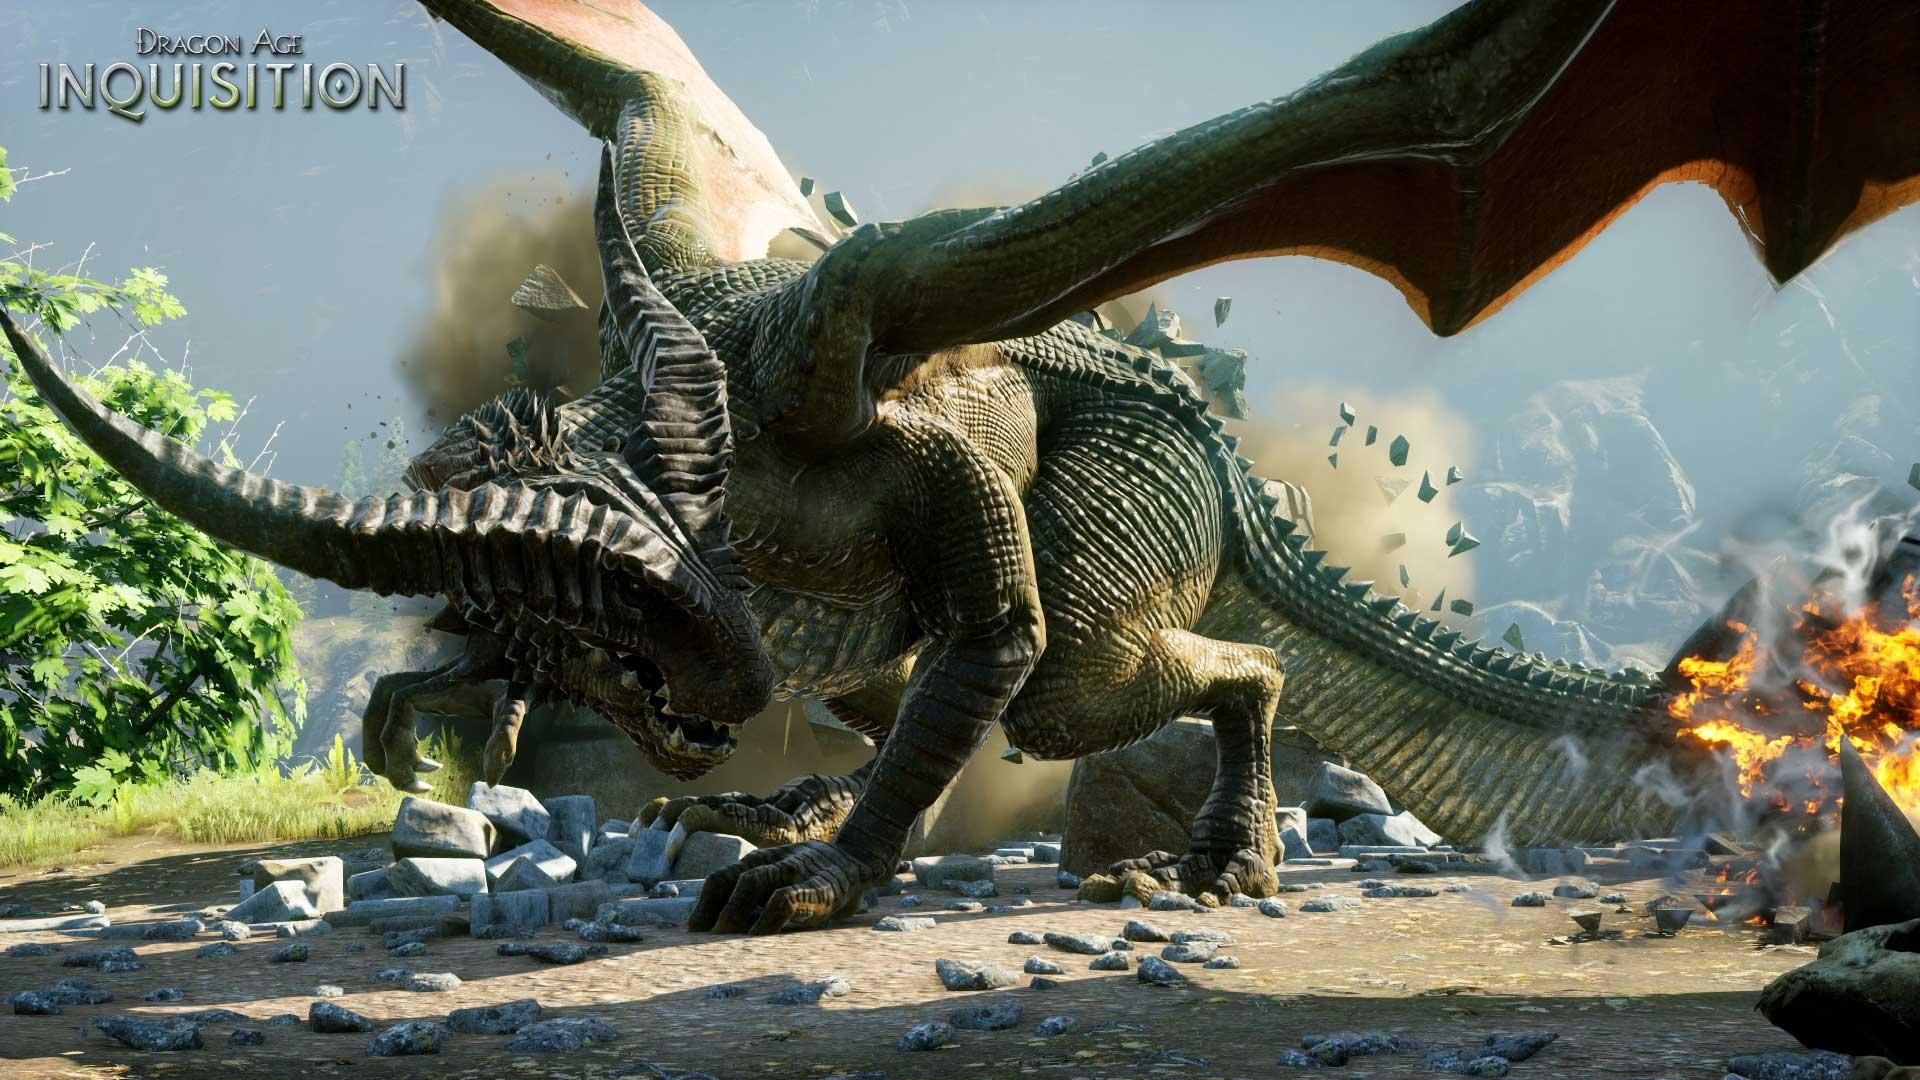 A Nice Long Look at Dragon Age: Inquisition Gameplay